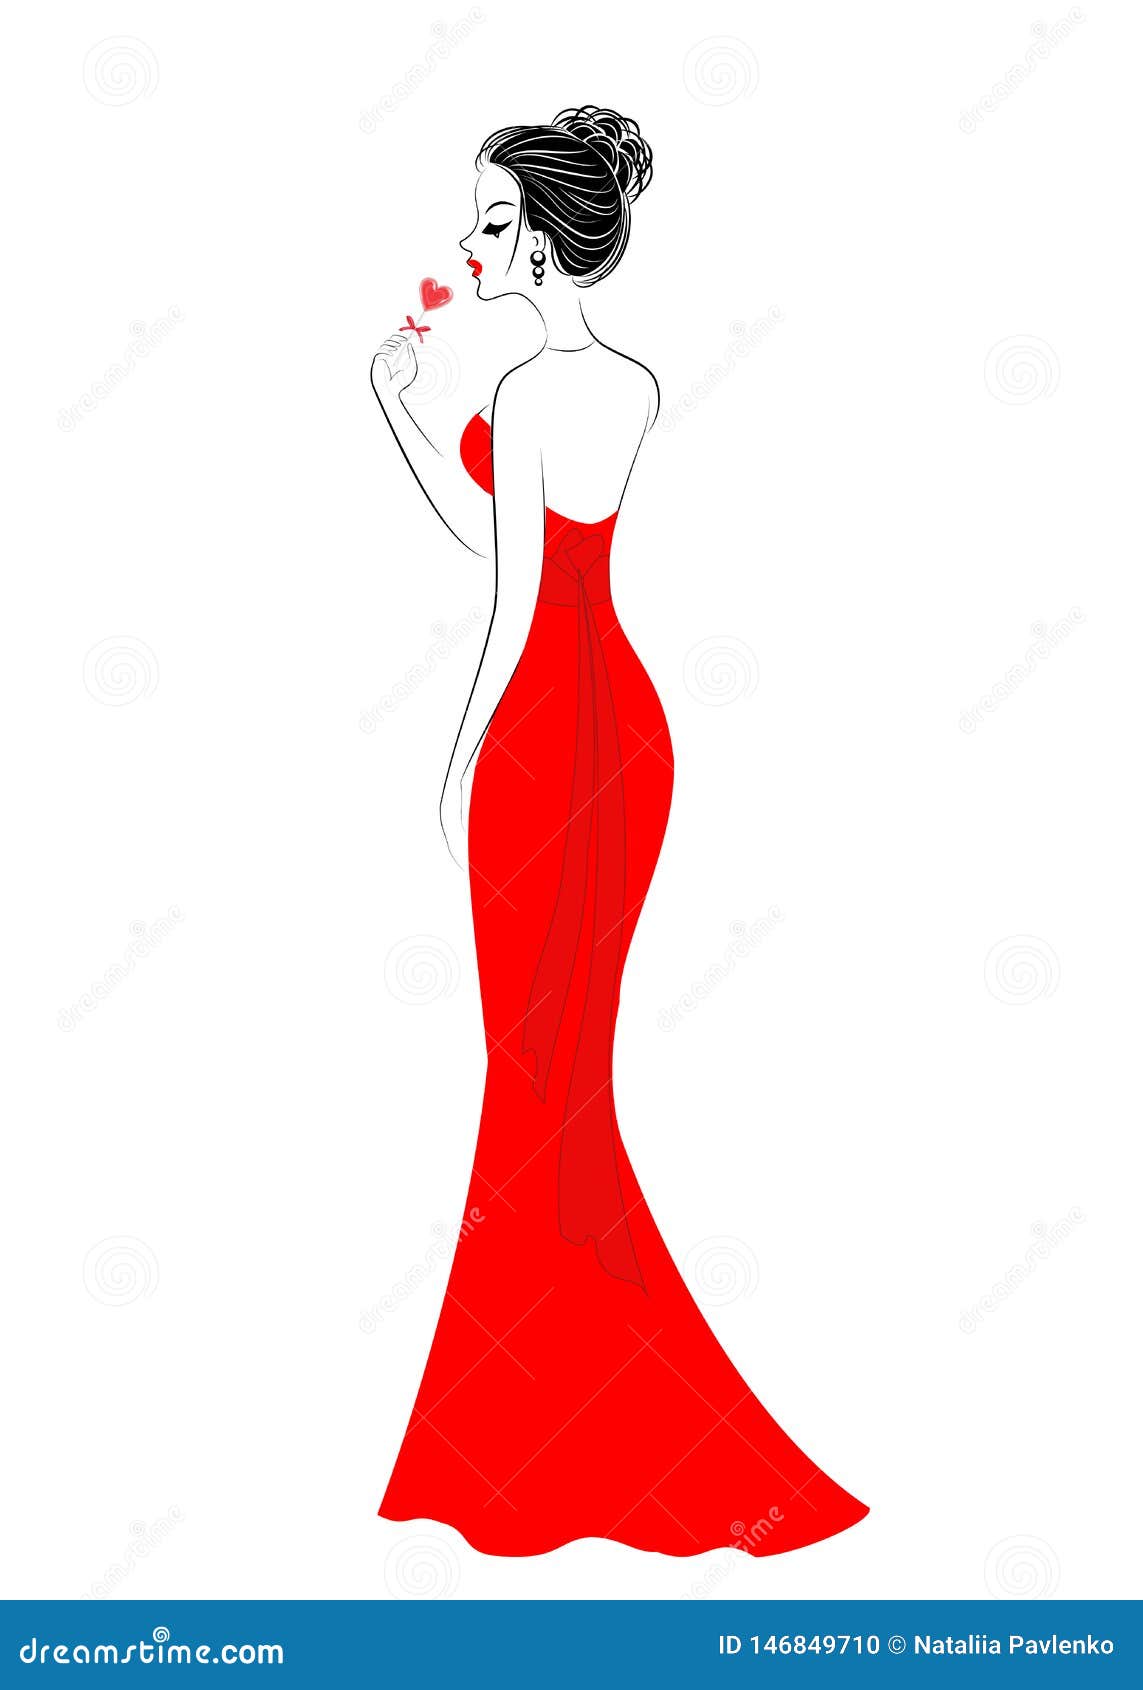 Silhouette of a Sweet Lady in a Red Dress. a Girl is Eating Candy